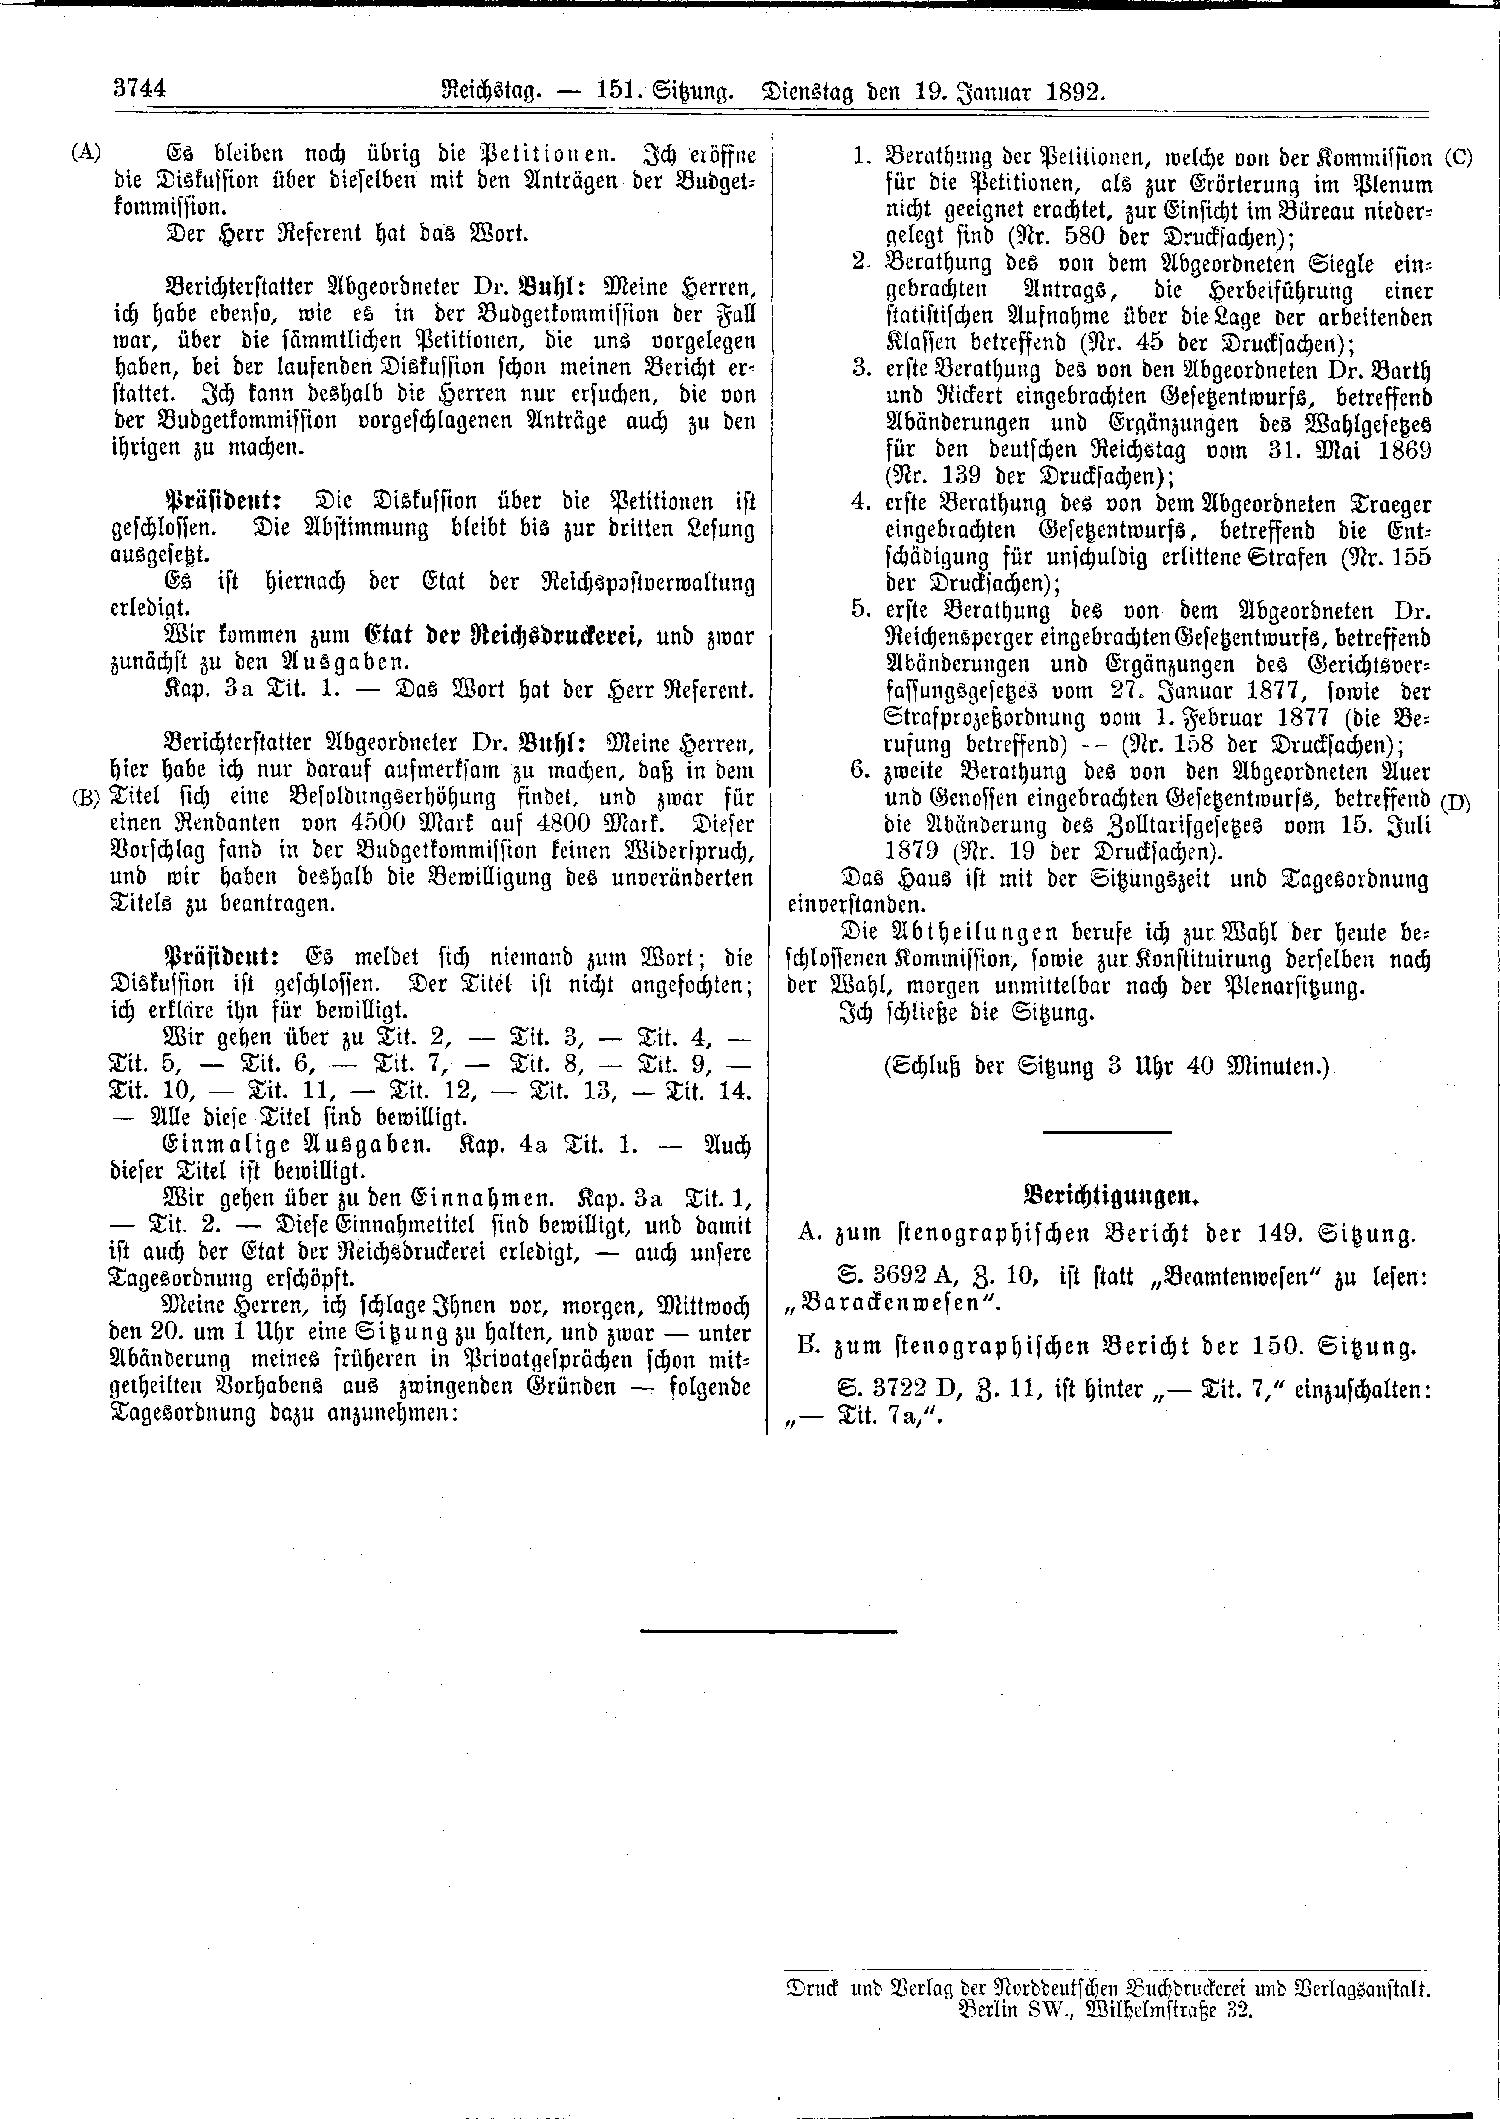 Scan of page 3744